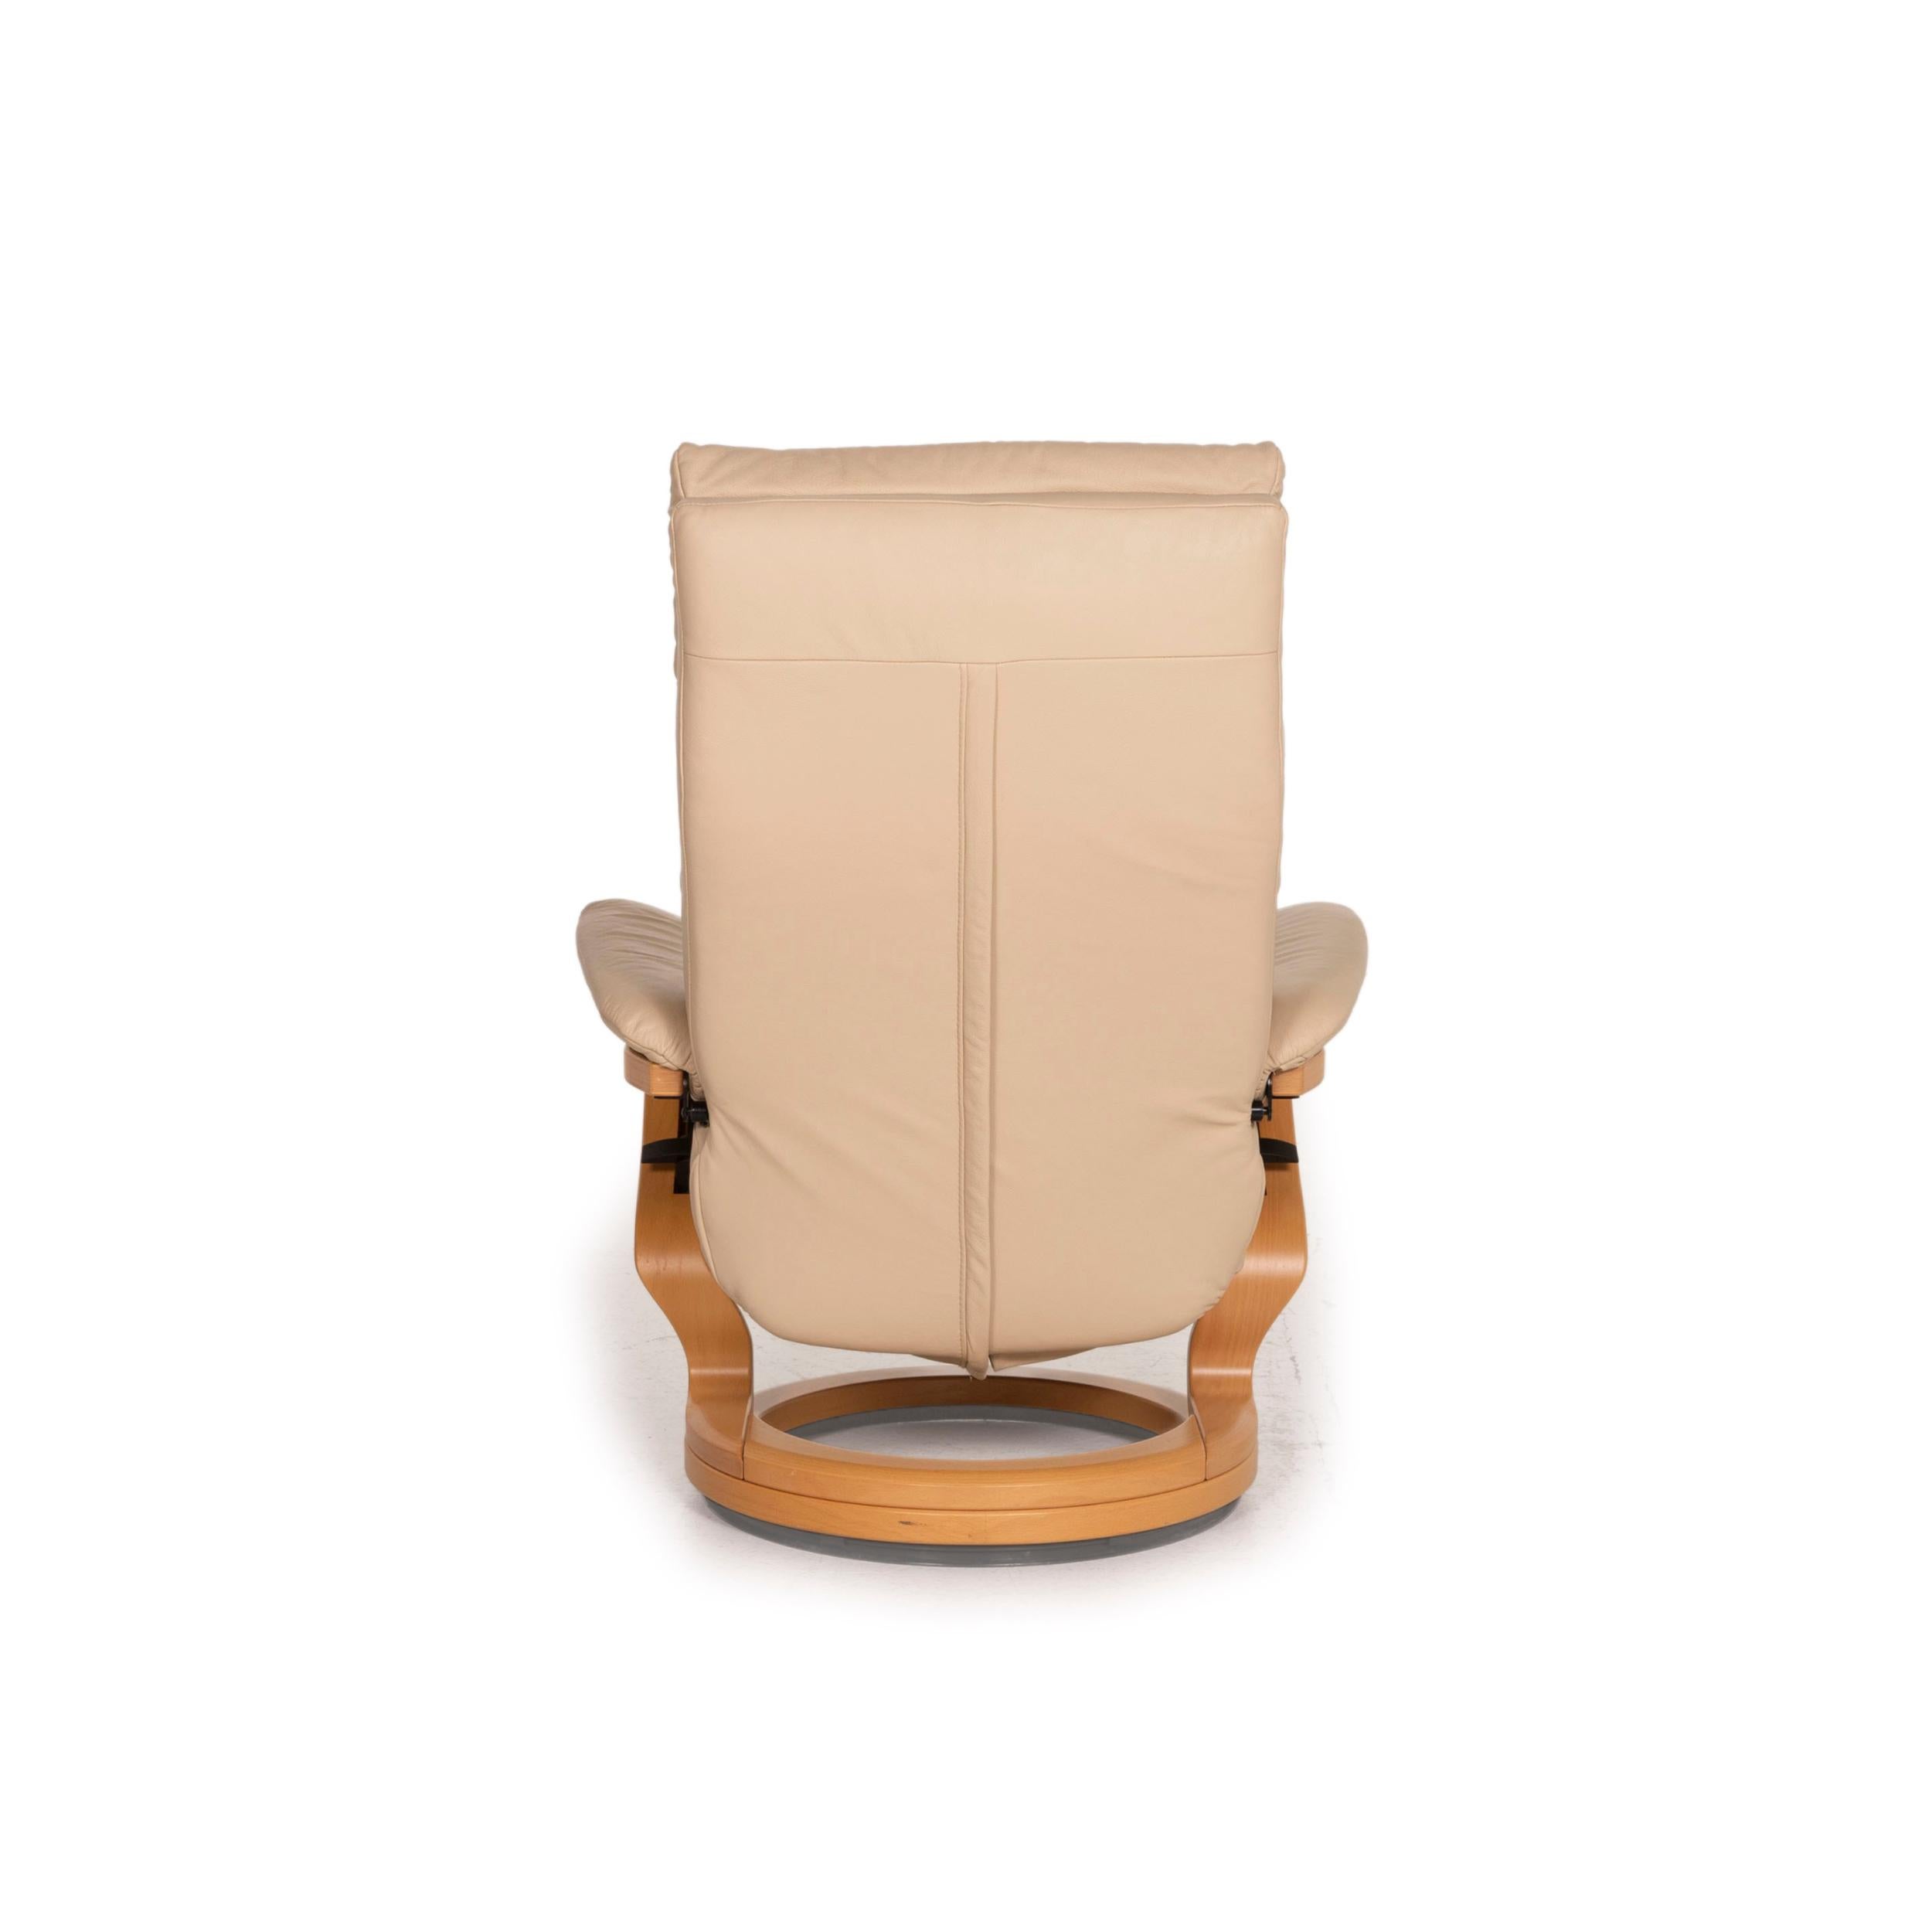 Himolla Leather Armchair Beige Function Relaxation Function 6